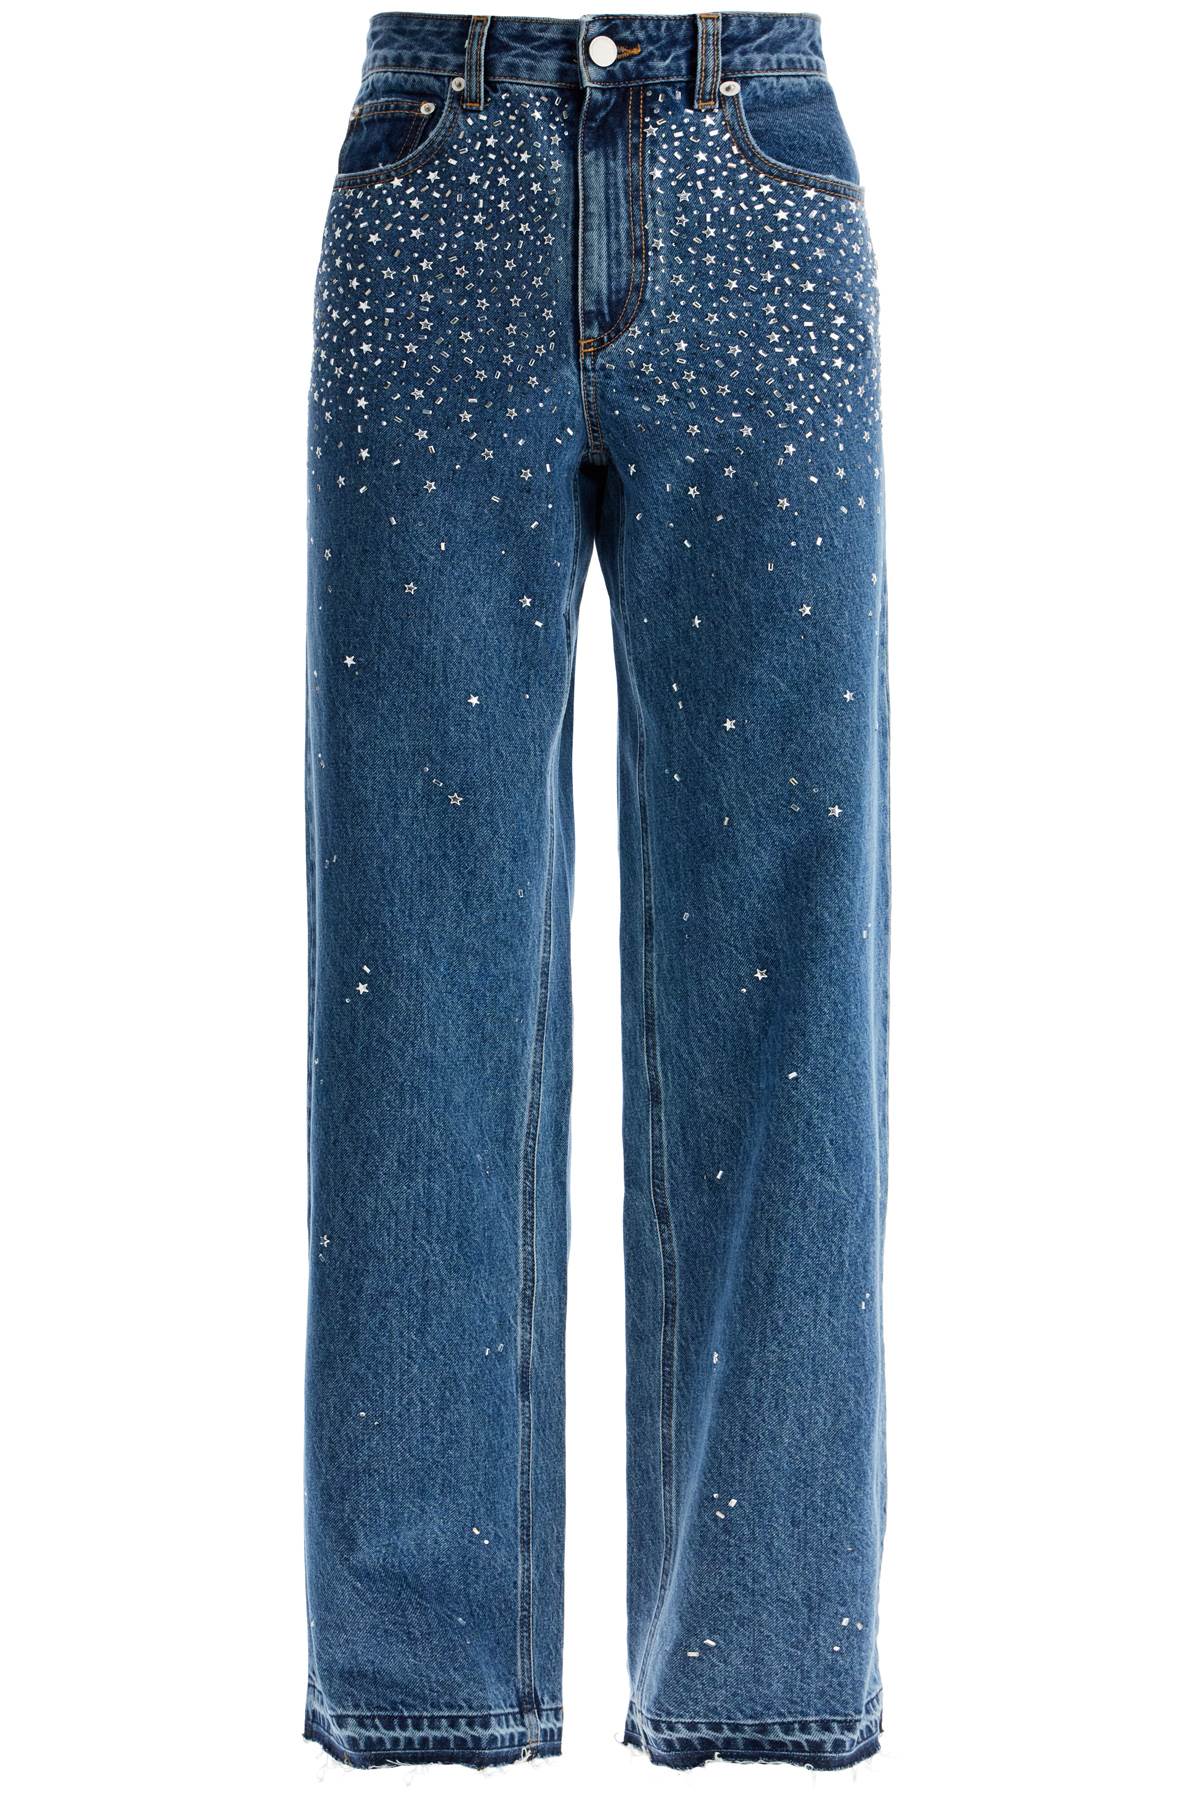 Alessandra Rich ALESSANDRA RICH baggy jeans with applique